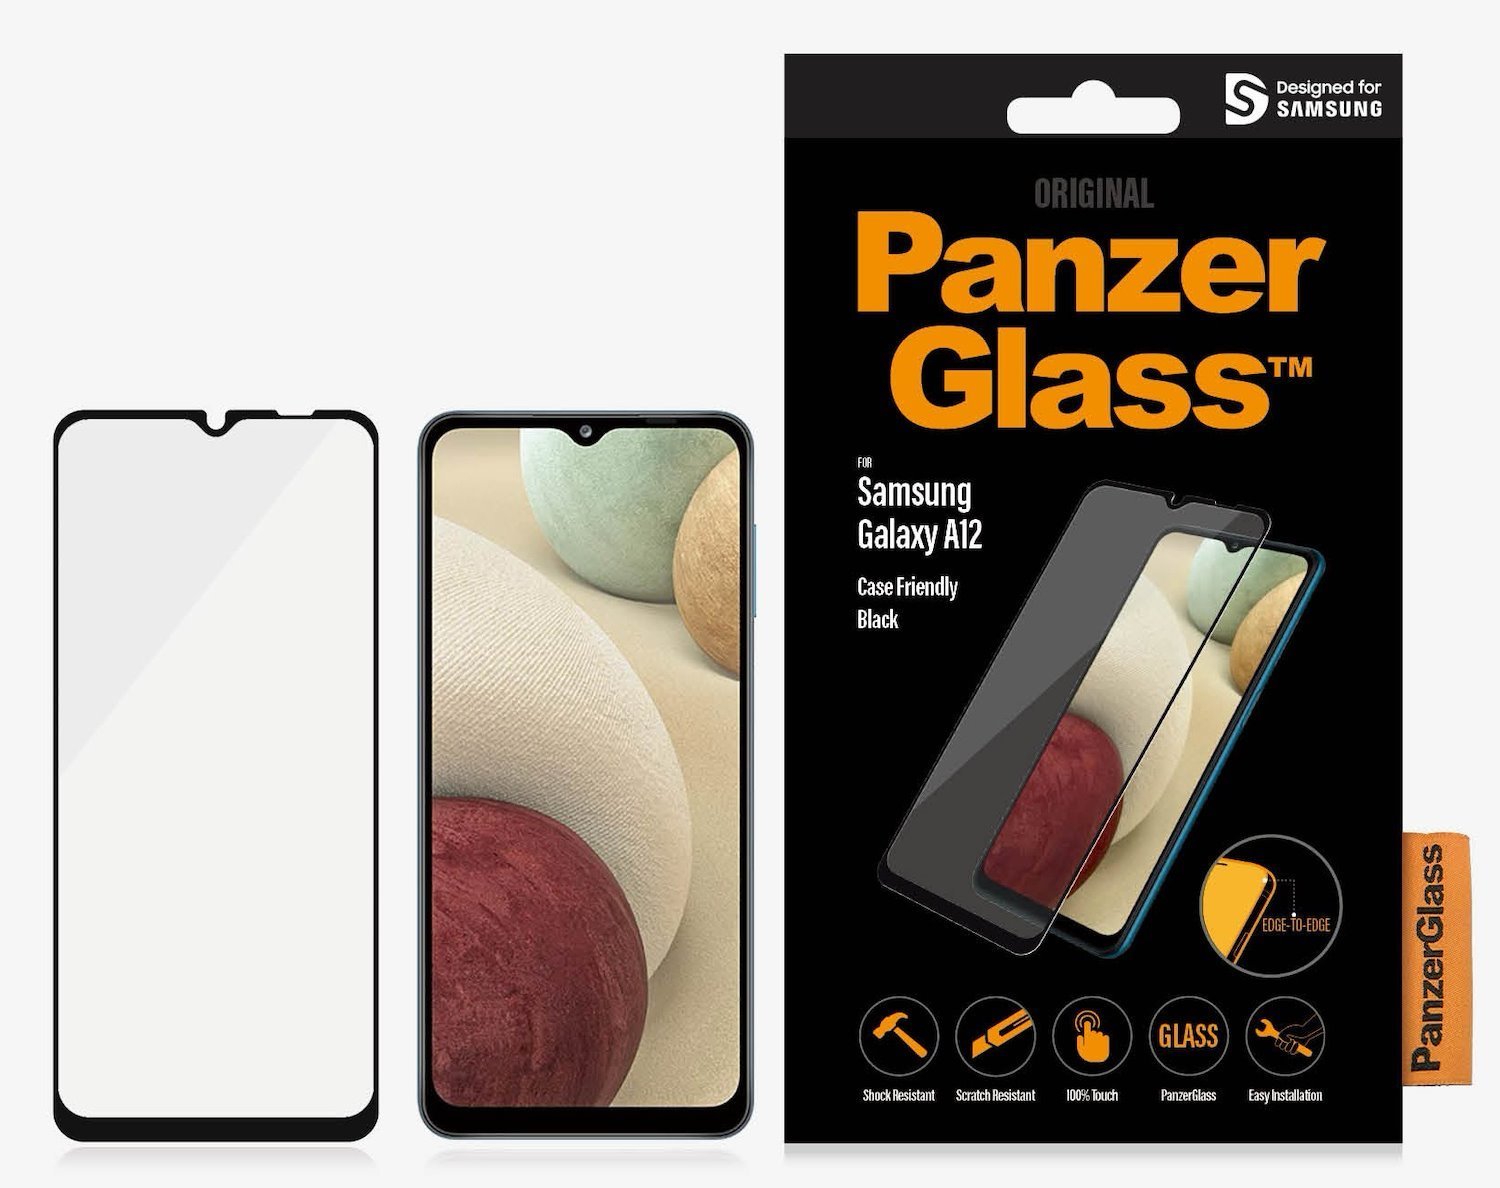 Panzer Glass PanzerGlass Case Friendly Entry Level Screen Protection For Samsung Galaxy A12 , Black,Full Frame coverage,Crystal Clear